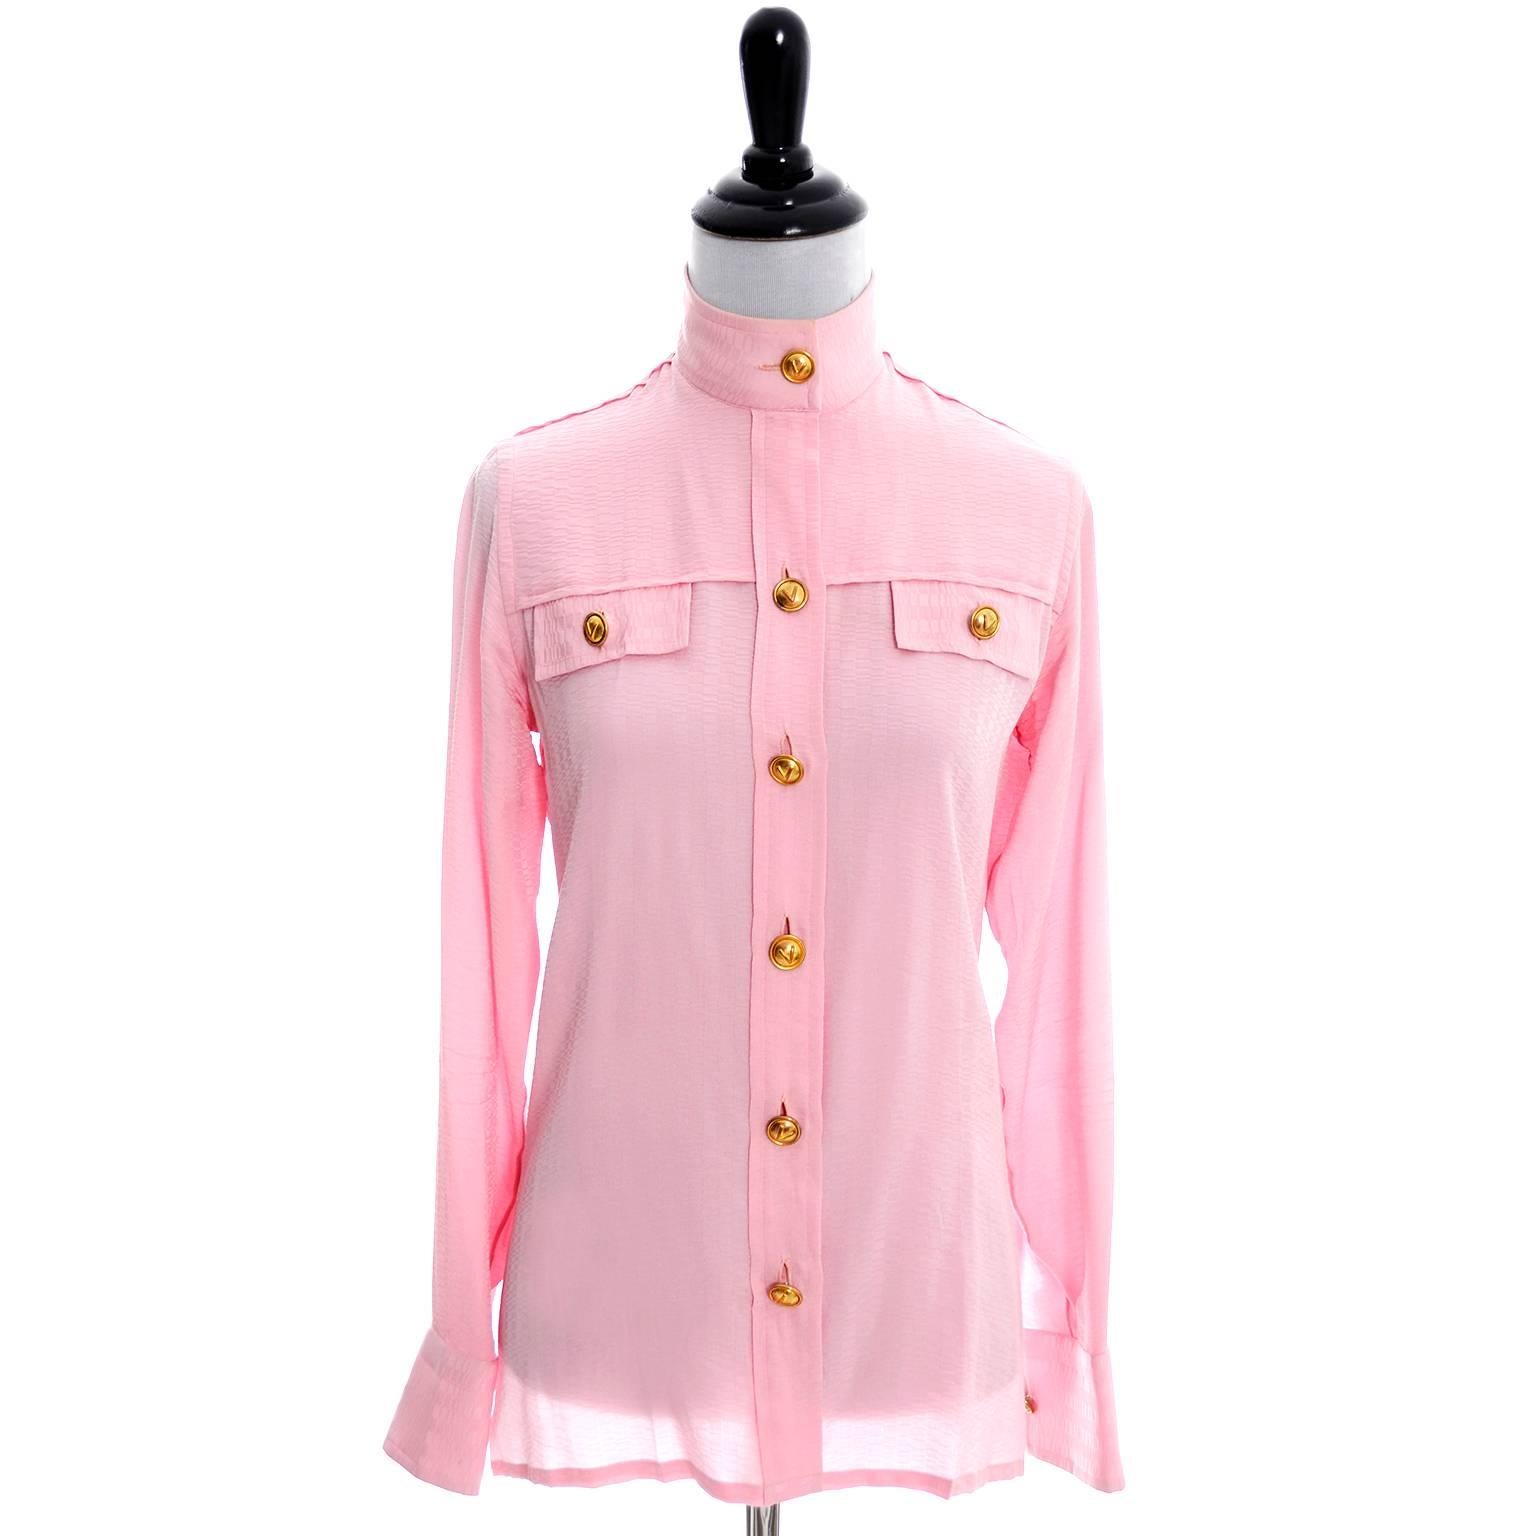 This is a simply divine tonal patterned pink silk vintage blouse from Valentino. This rare 70's Valentino pussy bow blouse is one that we have hesitated to sell because it is one of our favorites. You can wear this top with the pretty sash tied in a